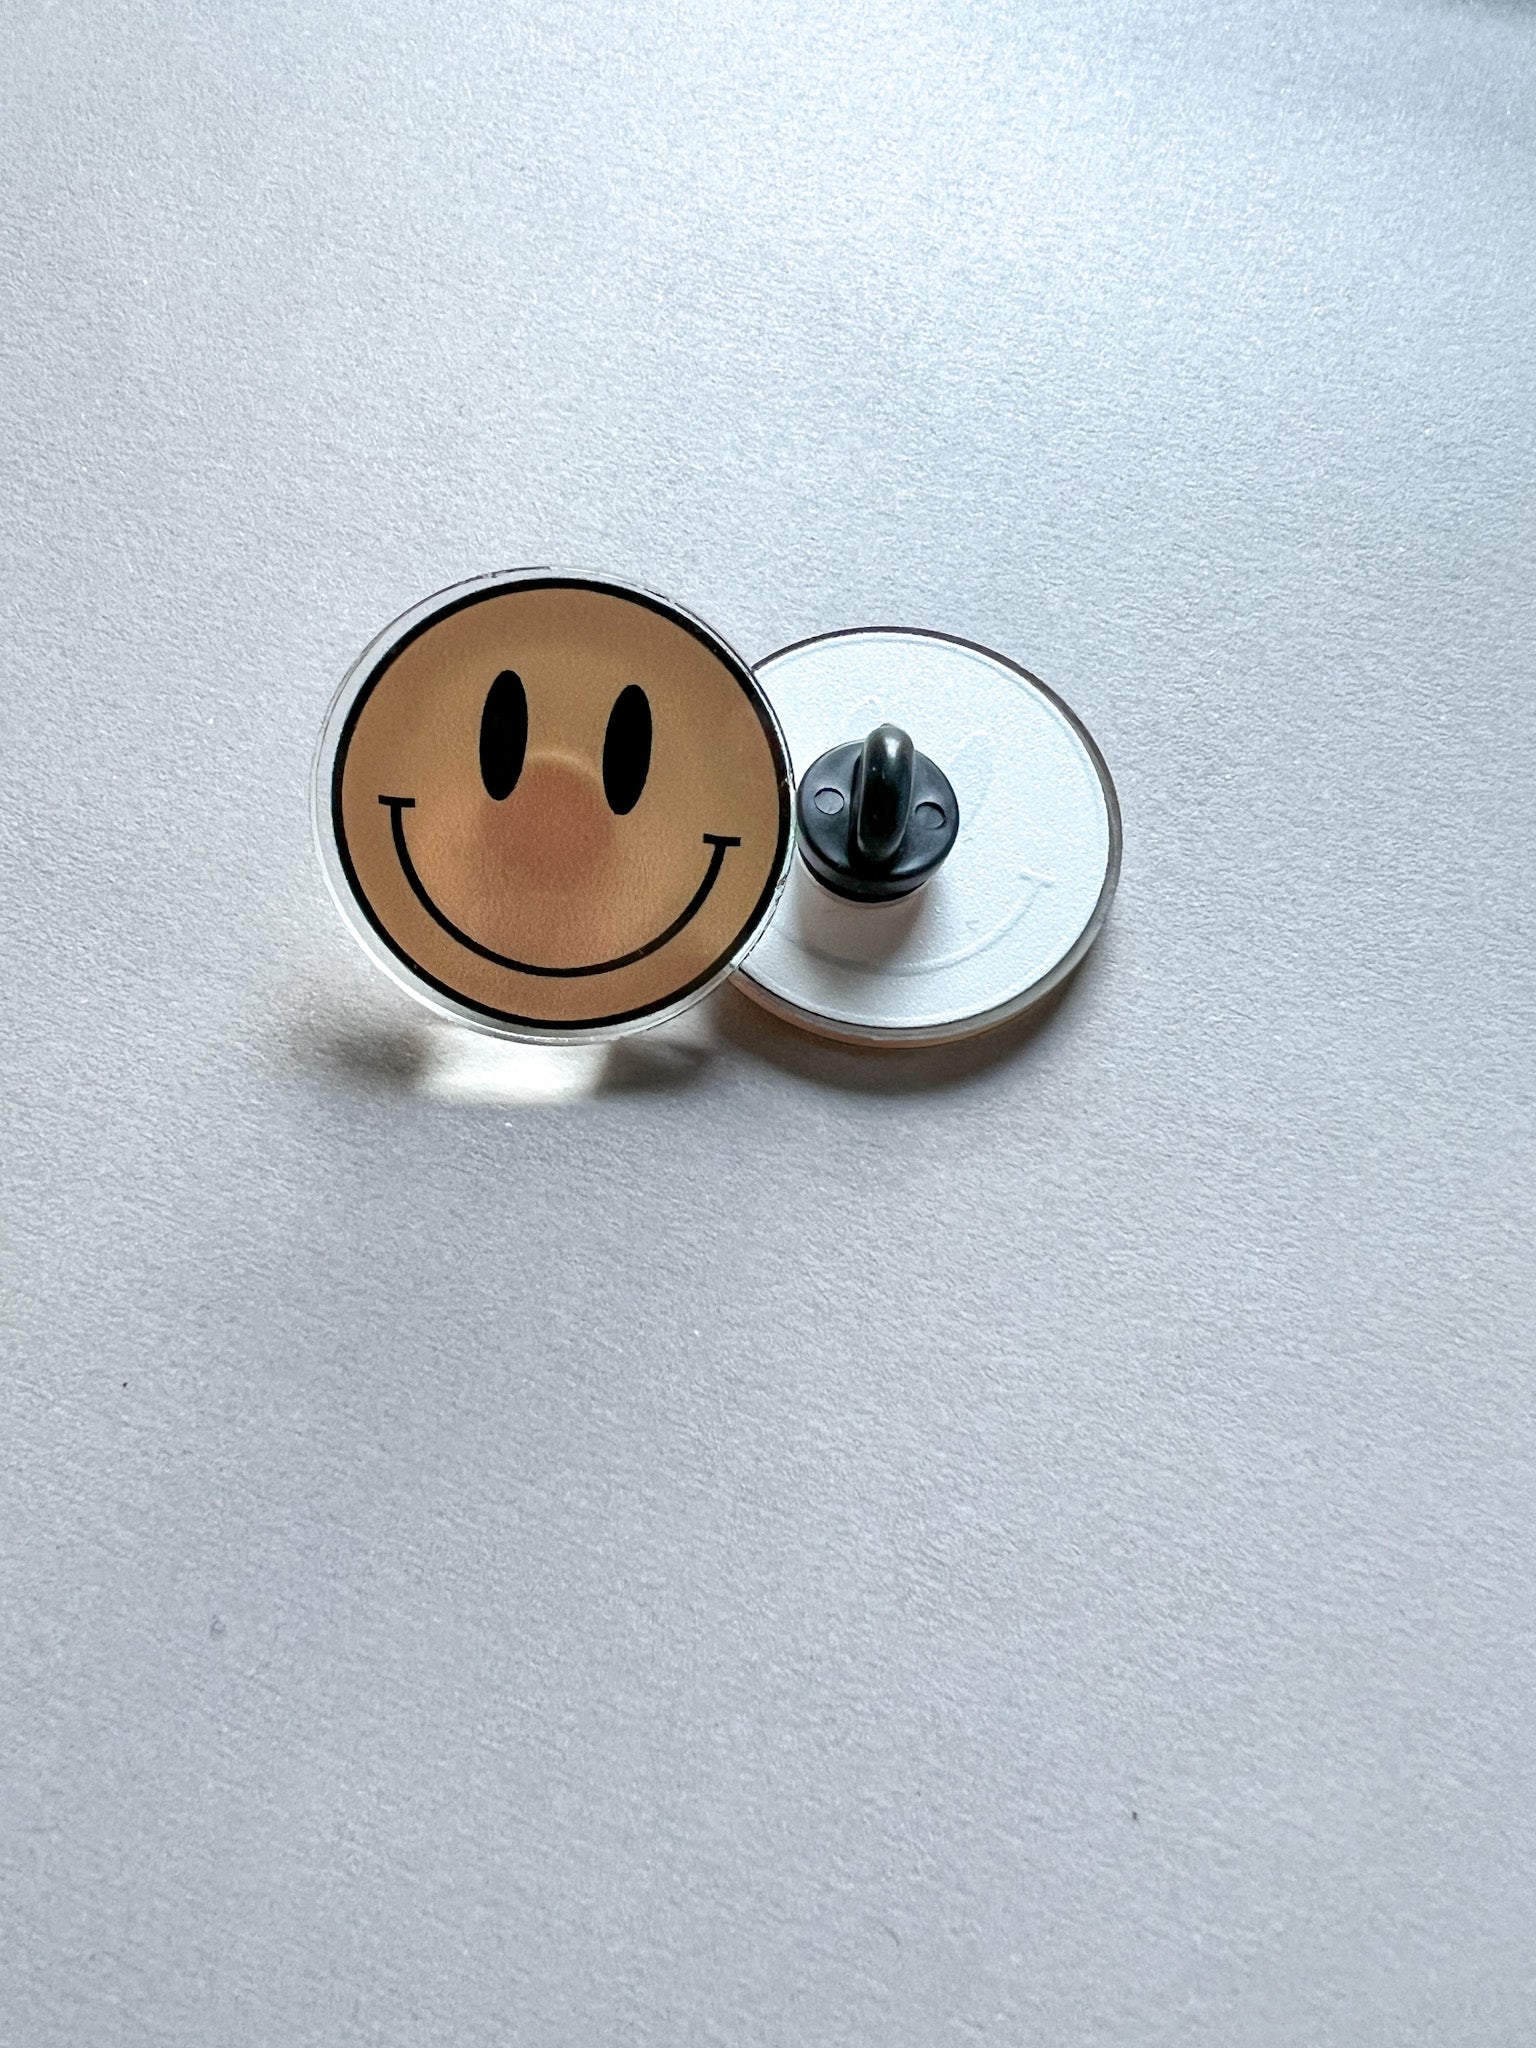 Higher Vibes Smiley Face Pin - Higher Blend